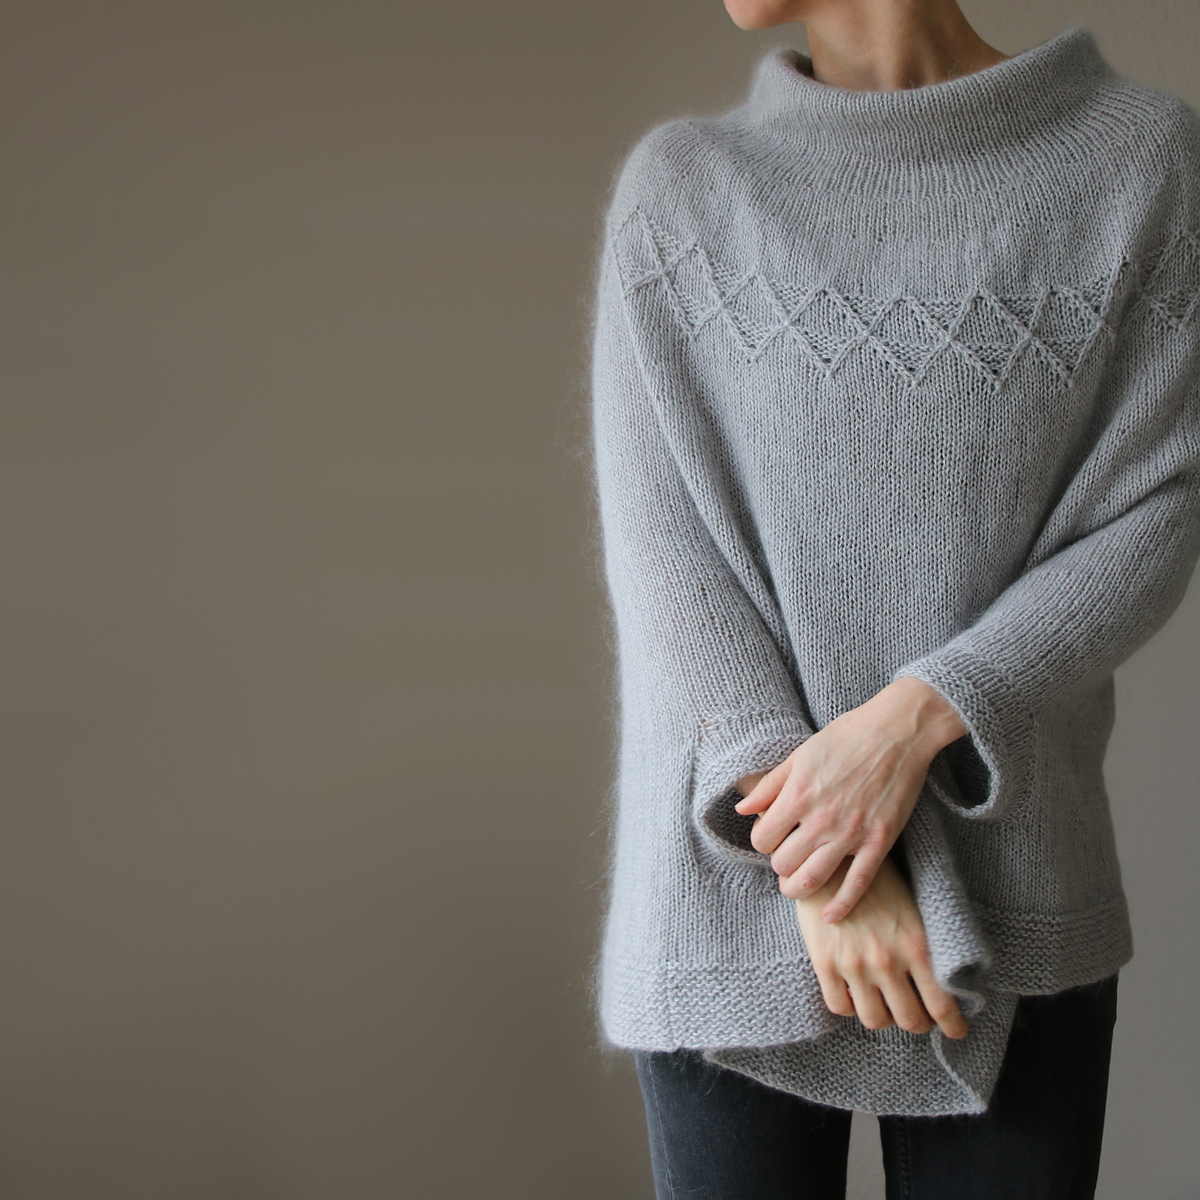 Shibui Knits Silk Cloud and Echo Quiet City Pullover Kit - Women's ...